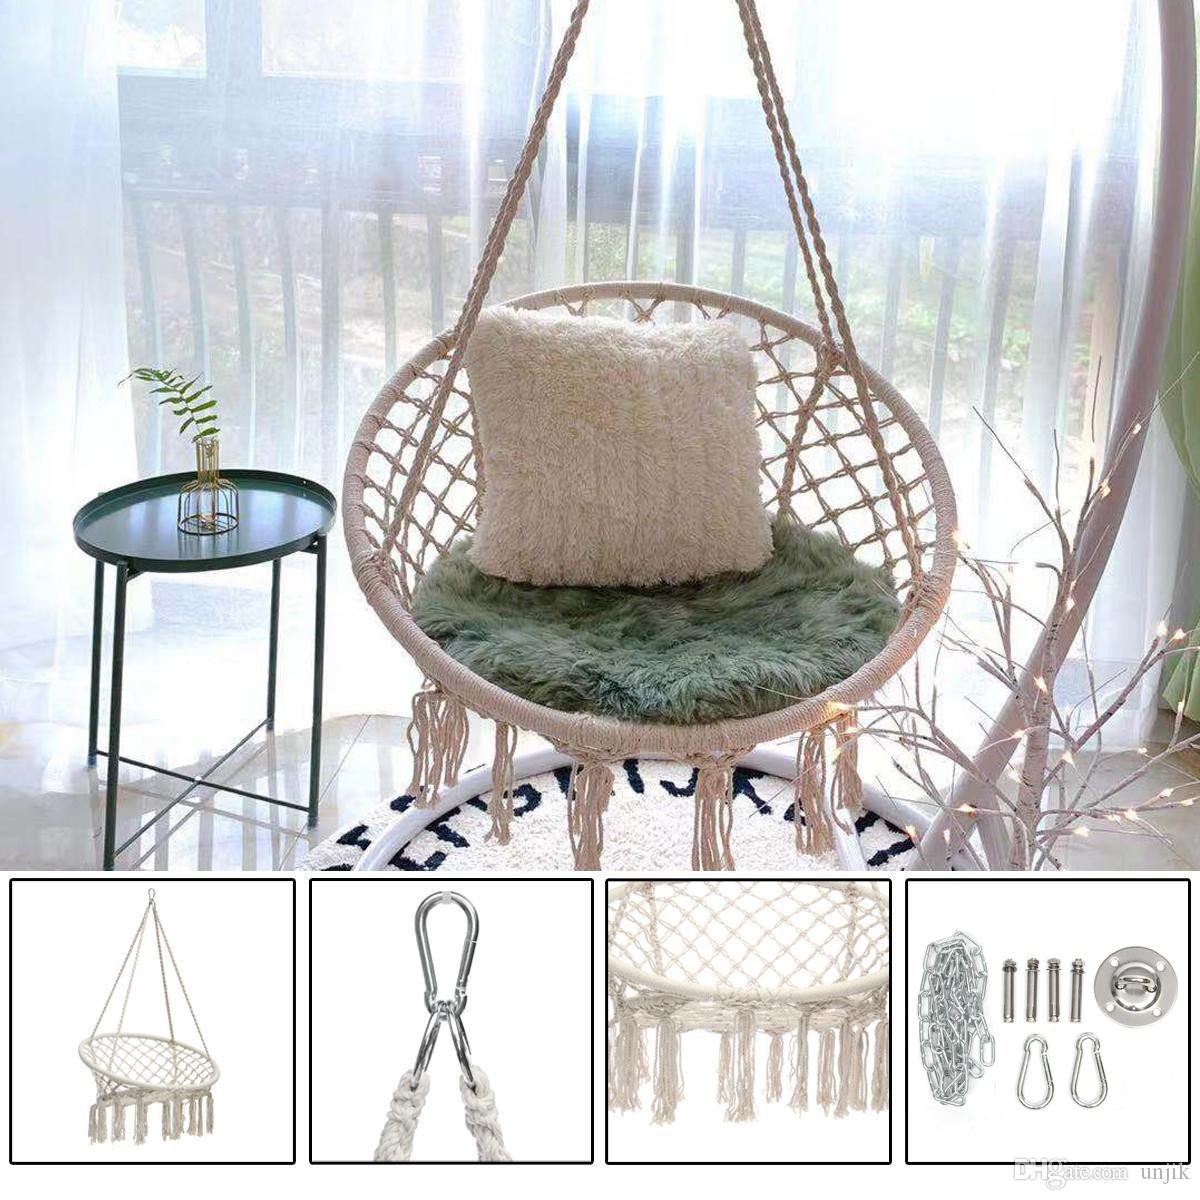 Indoor Hanging Chair for Bedroom Fresh 2019 Round Hammock Swing Hanging Chair Outdoor Indoor Dormitory Bedroom Hanging Chair for Child Adult Safety Hammock with Accessories From Unjik